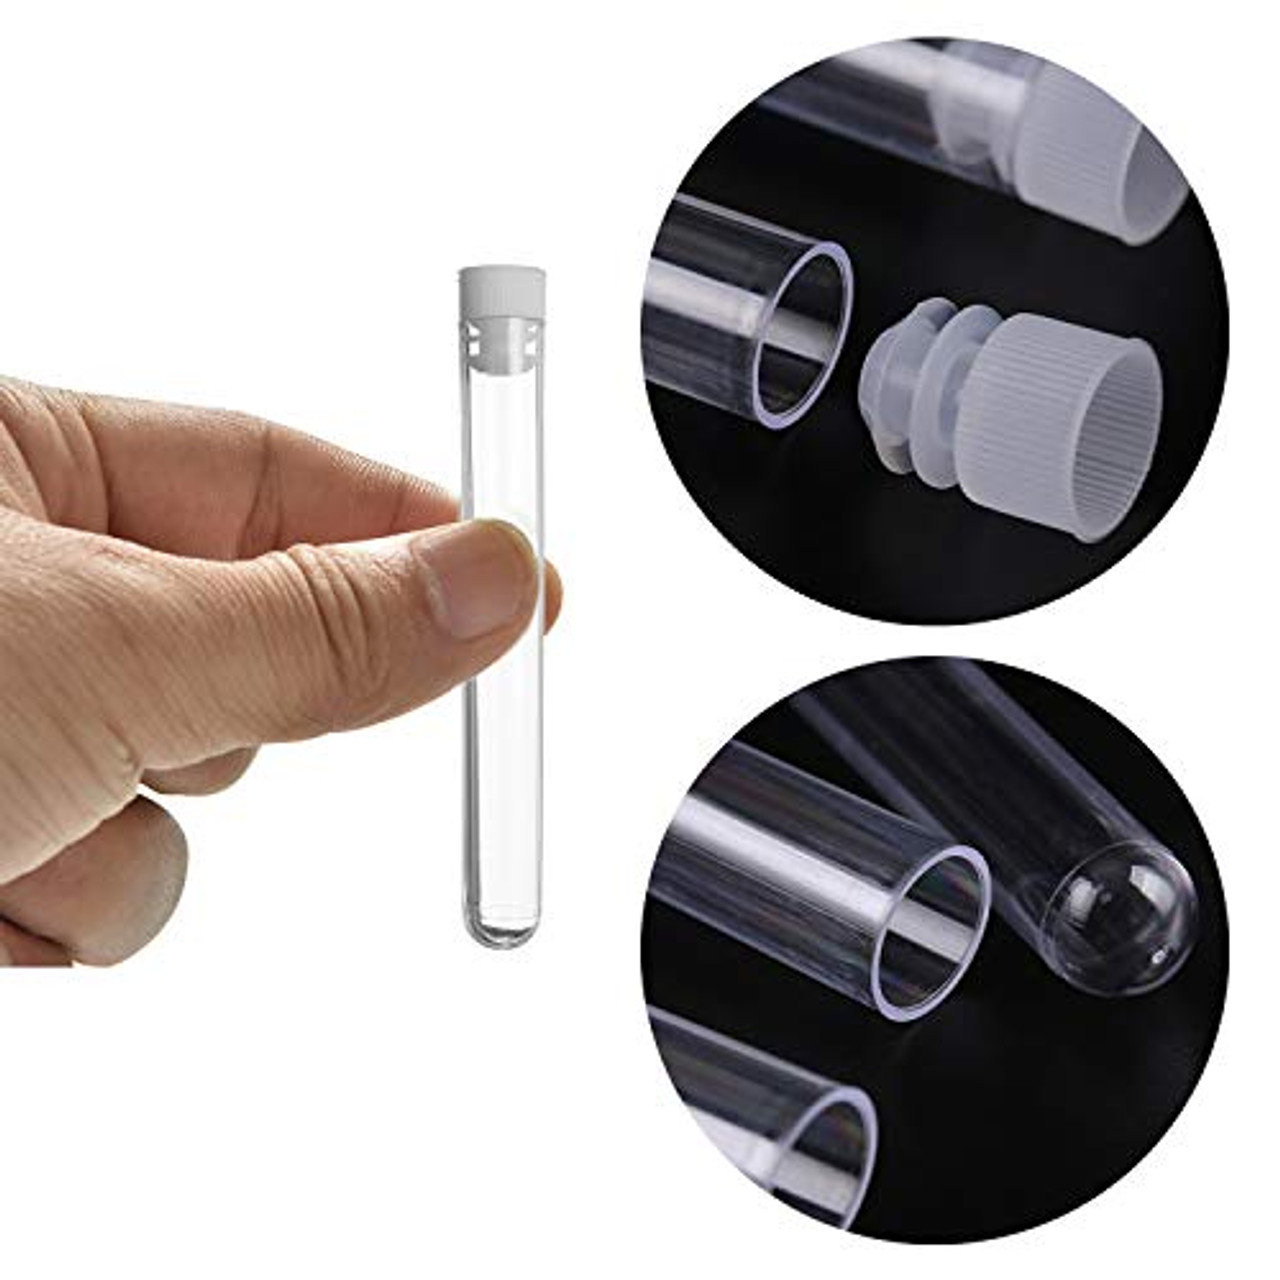 50 Pack 85ml Plastic Tubes with Caps, 150x30mm Plastic Clear Test Tubes for Sample, Scientific Experiments, Party, Candy Storage